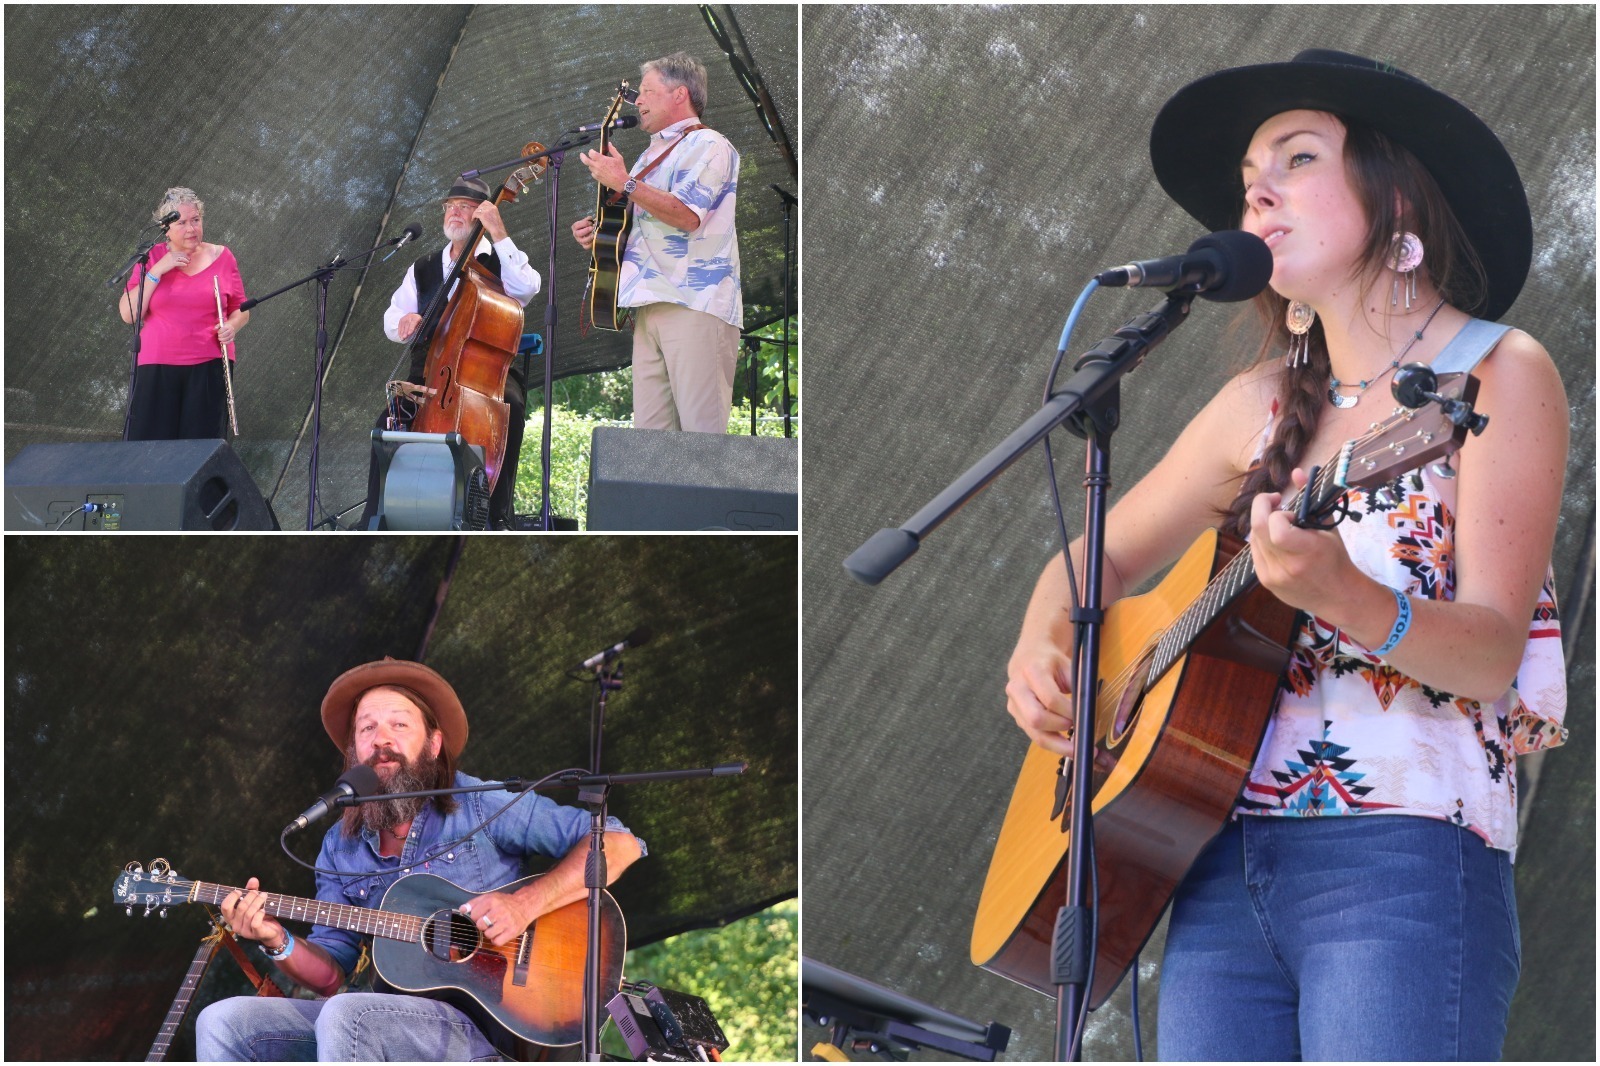 Musicians perform at Nowoodstock, one of the best music festivals in Wyoming.